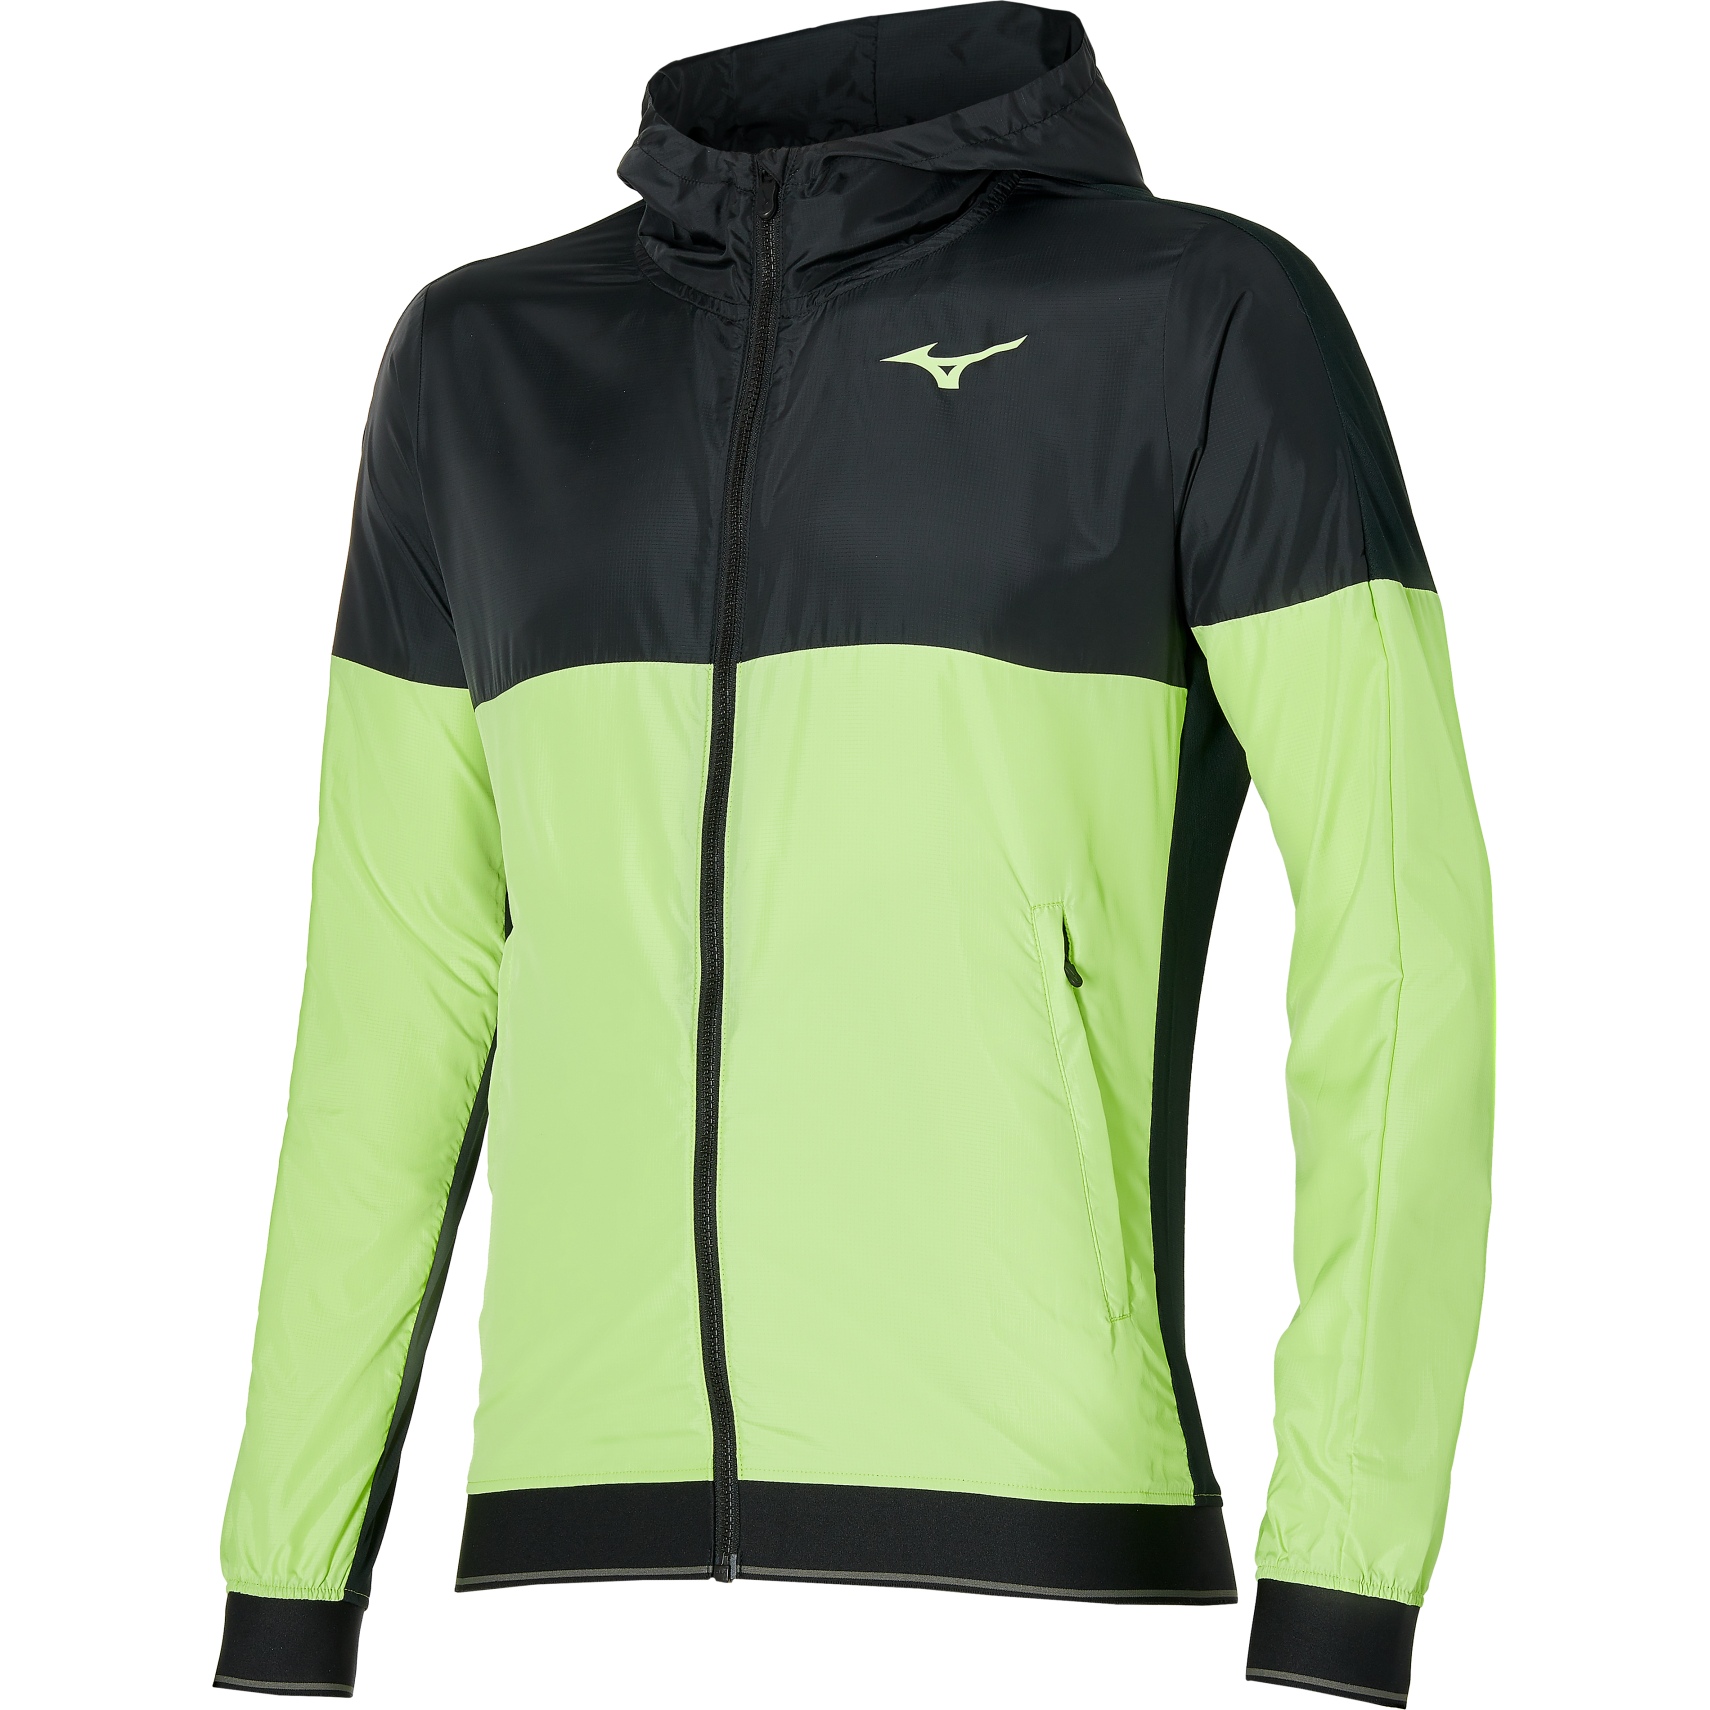 Picture of Mizuno Hoody Jacket - Neo Lime